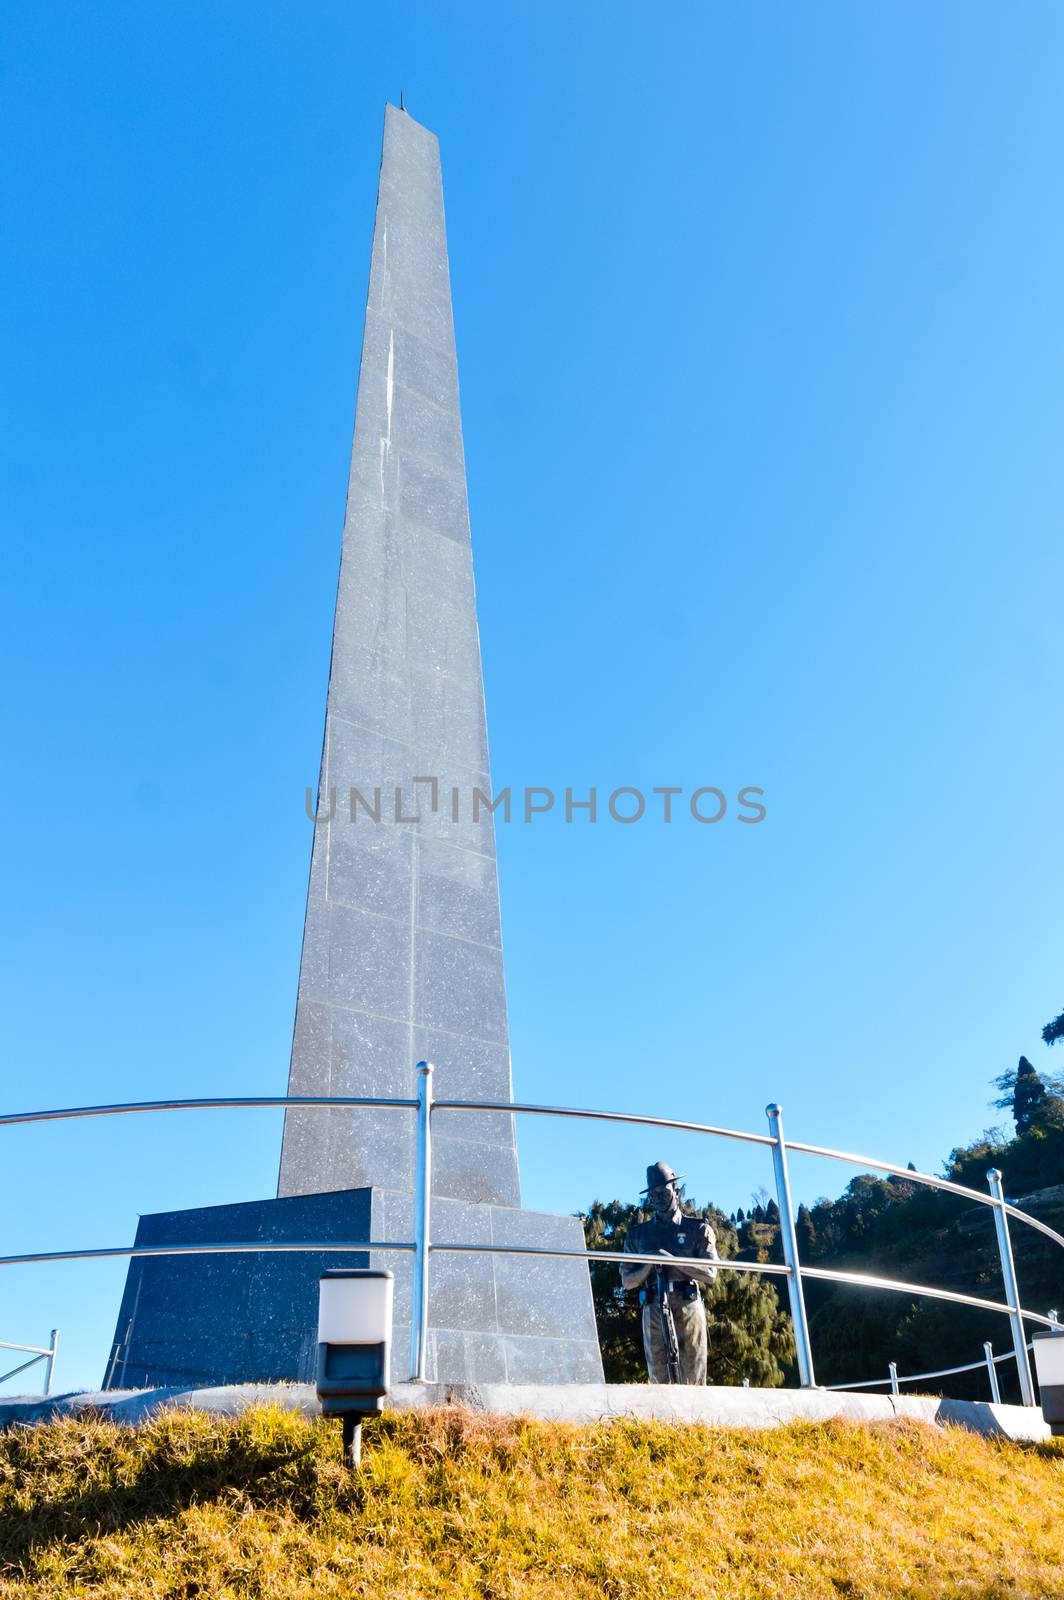 View of Batasia loop war memorial, The famous Gorkha war memorial in Ghum, Darjeeling India. The place opened in1995 to commemorate soldiers who lost their lives in struggles post Indian independence. by sudiptabhowmick